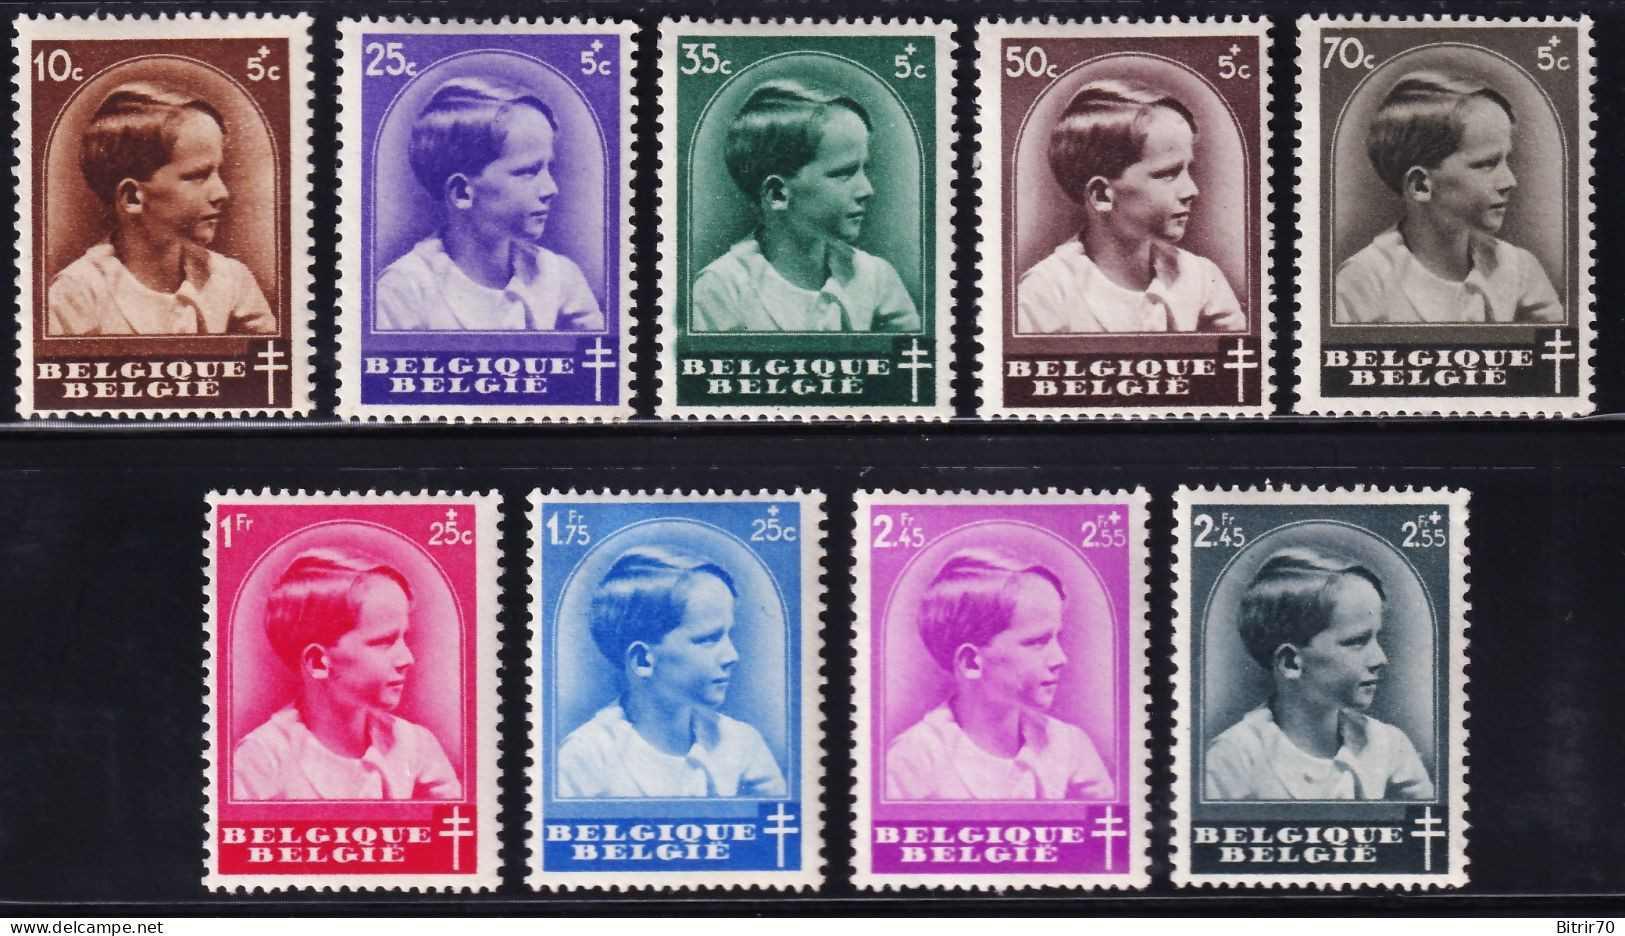 Belgica, 1936 Y&T. 438 / 445, 446, MNH. - Unused Stamps